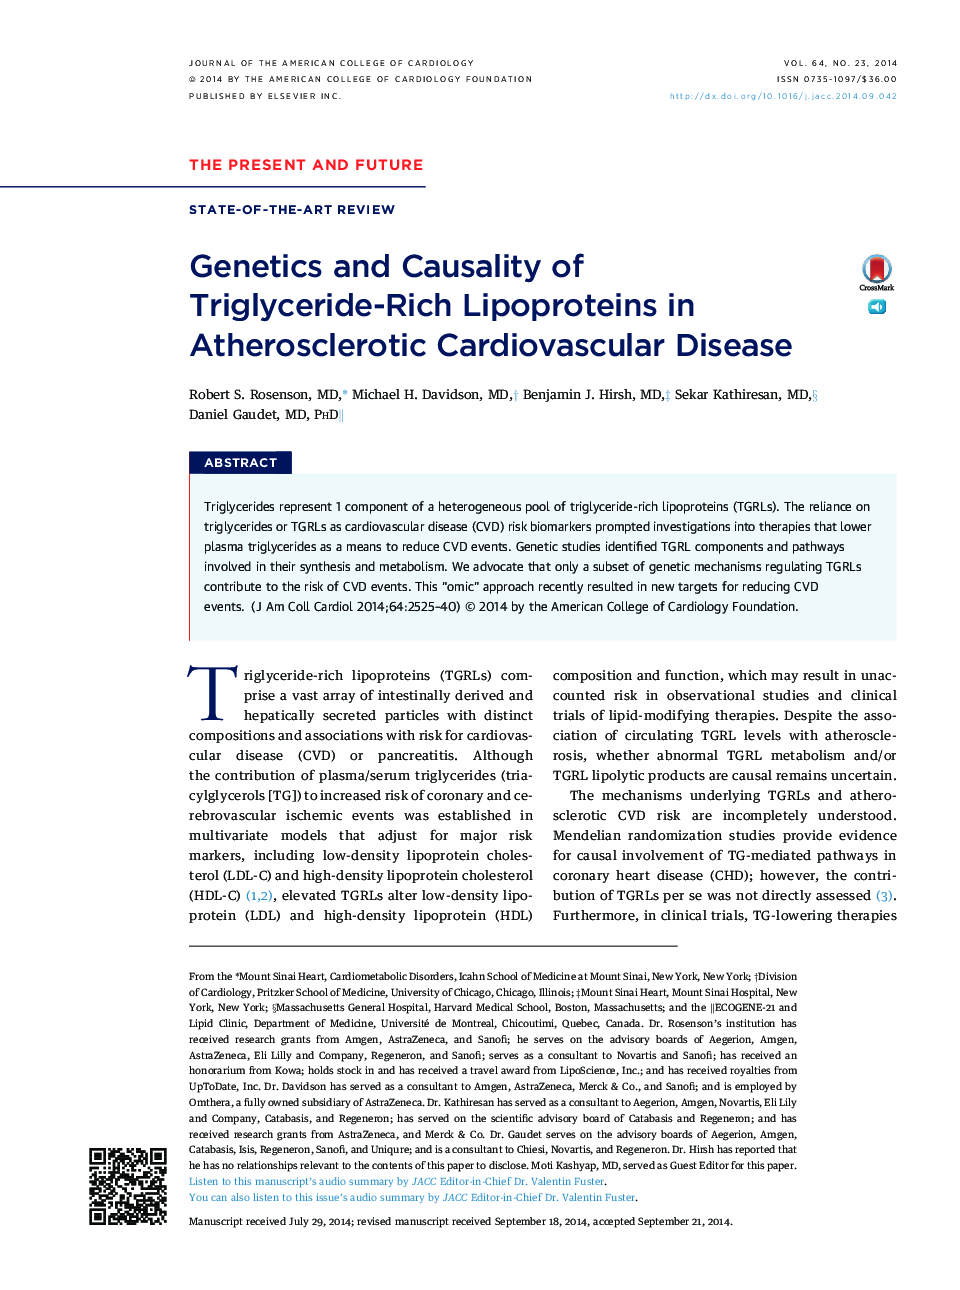 Genetics and Causality of Triglyceride-Rich Lipoproteins in Atherosclerotic Cardiovascular Disease 